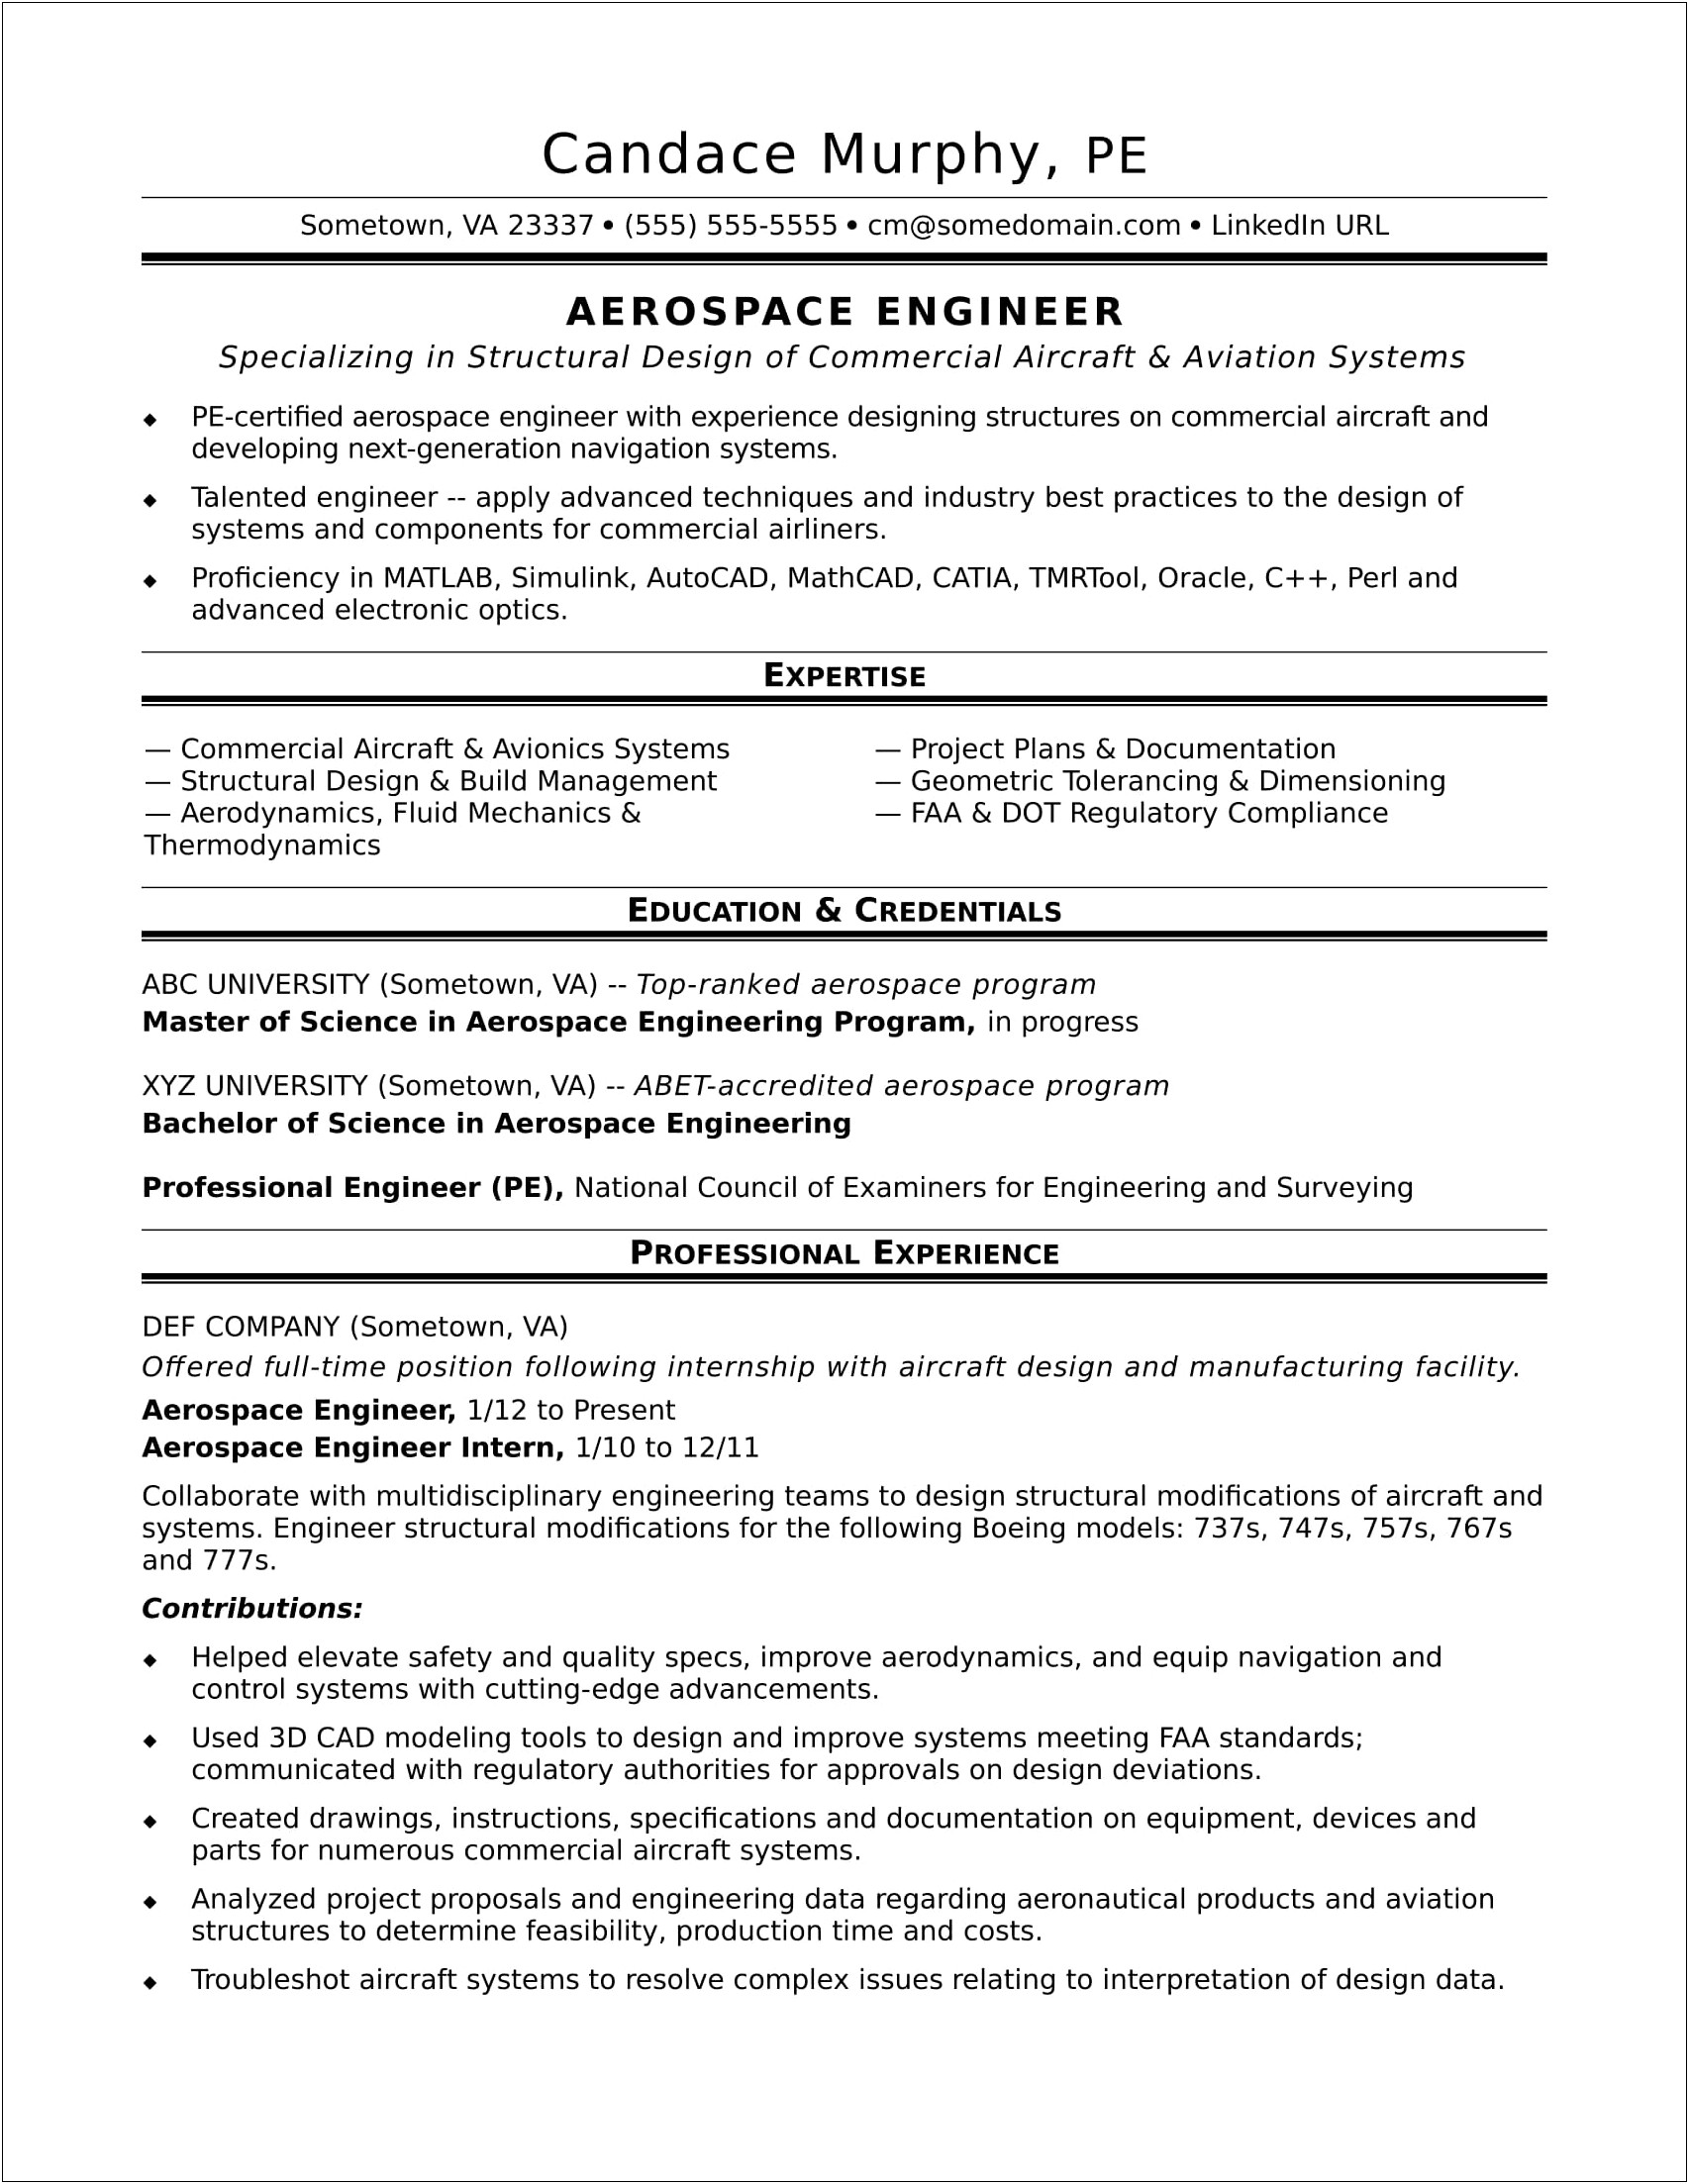 Best Machnical Engineer's Resume For Boeing